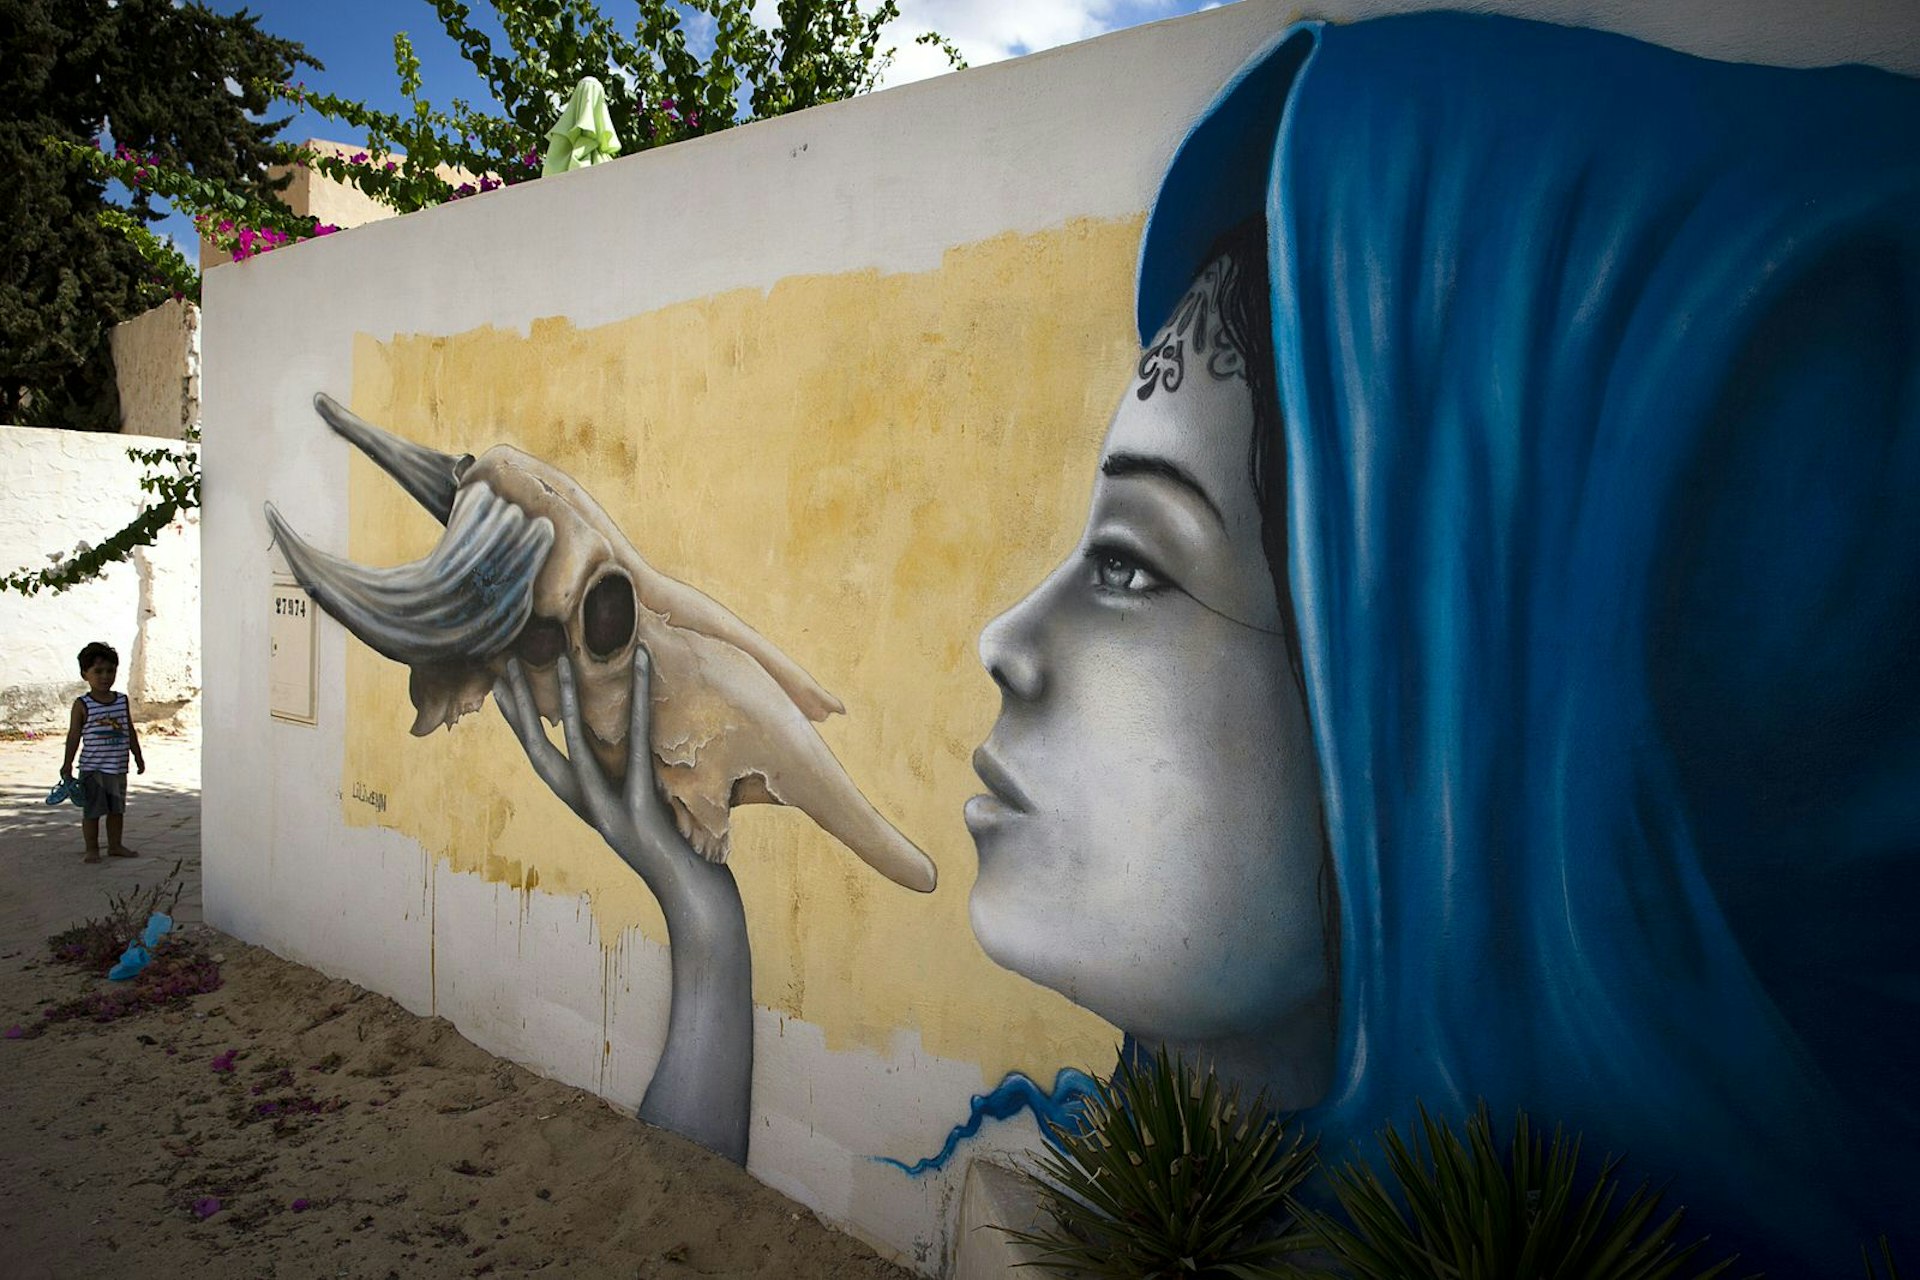 A child stands by a mural by French artist LILIWENN which decorates a wall in the village of Erriadh, on the Tunisian island of Djerba, on August 8, 2014, as part of the artistic project "Djerbahood". Nearly 100 artists from 30 different nationalities were invited by French-Tunisian organizer Mehdi Ben Cheikh to take part in an initiative to turn Djerba's Erriadh town into an "open sky museum". The village of Erriadh is one of the oldest in Tunisia where Jews, Muslims and Christians have lived together for centuries.